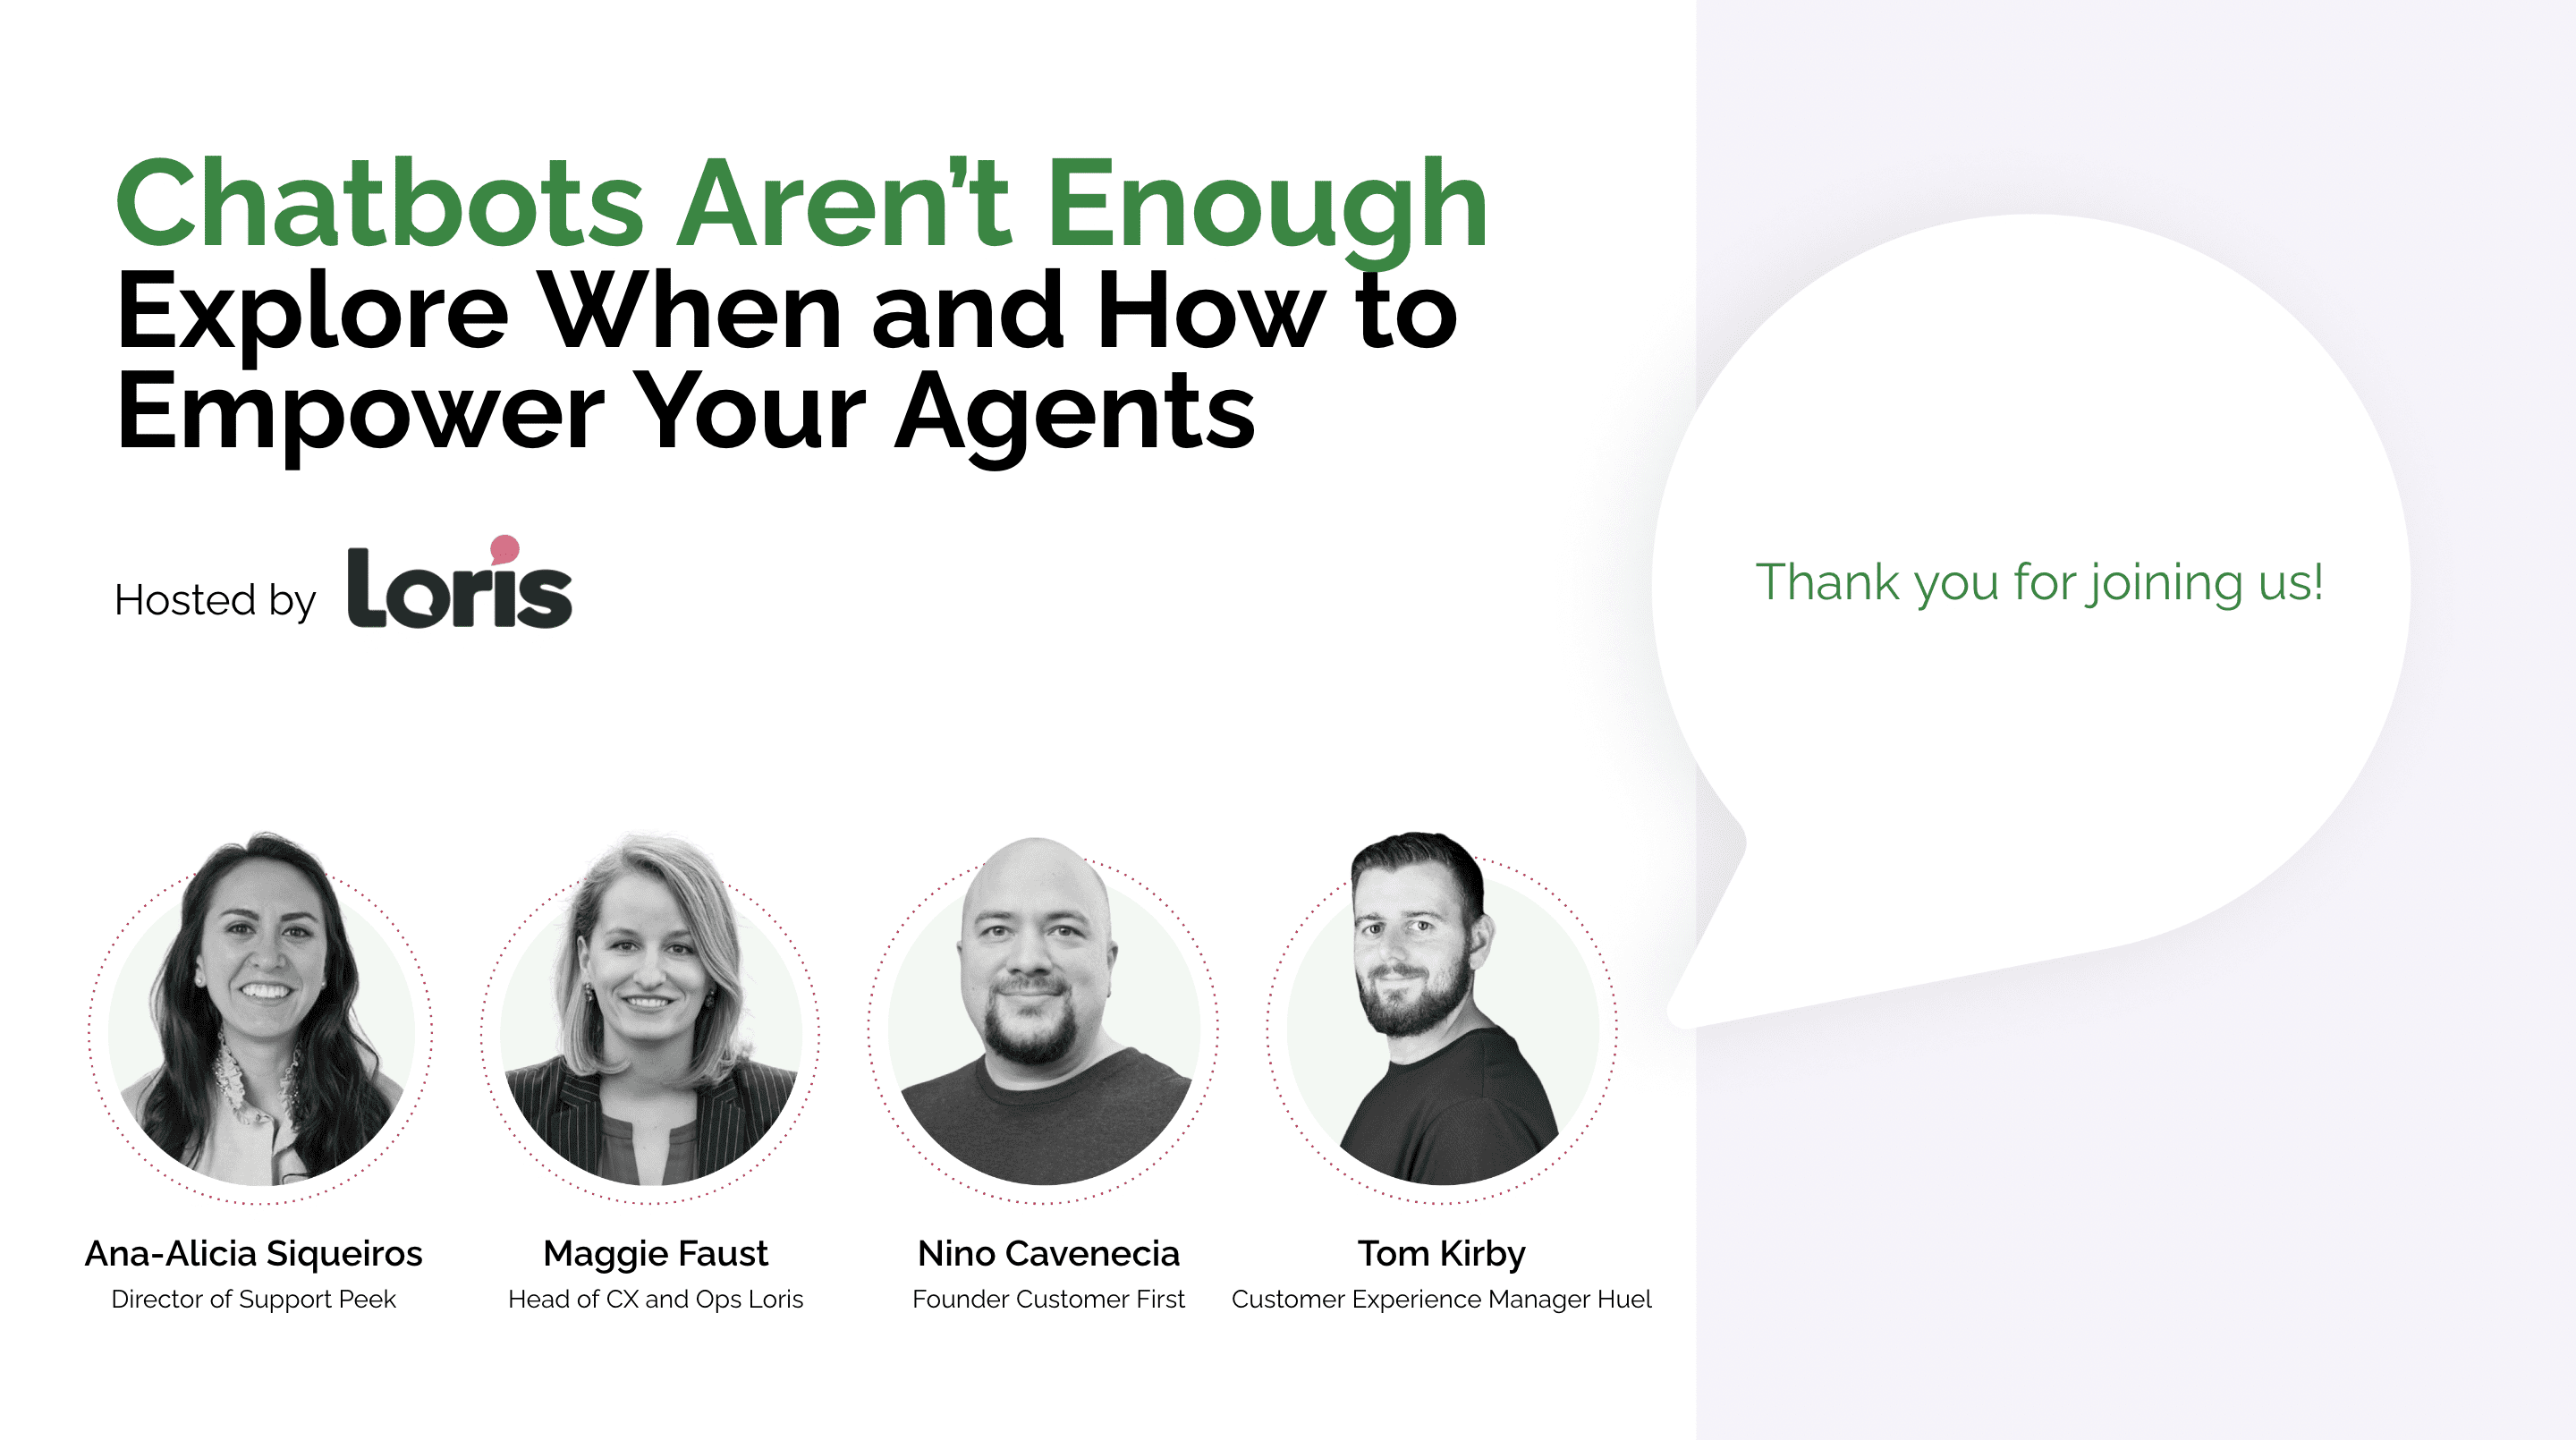 Chatbots Aren't Enough: When and How to Empower Your Agents